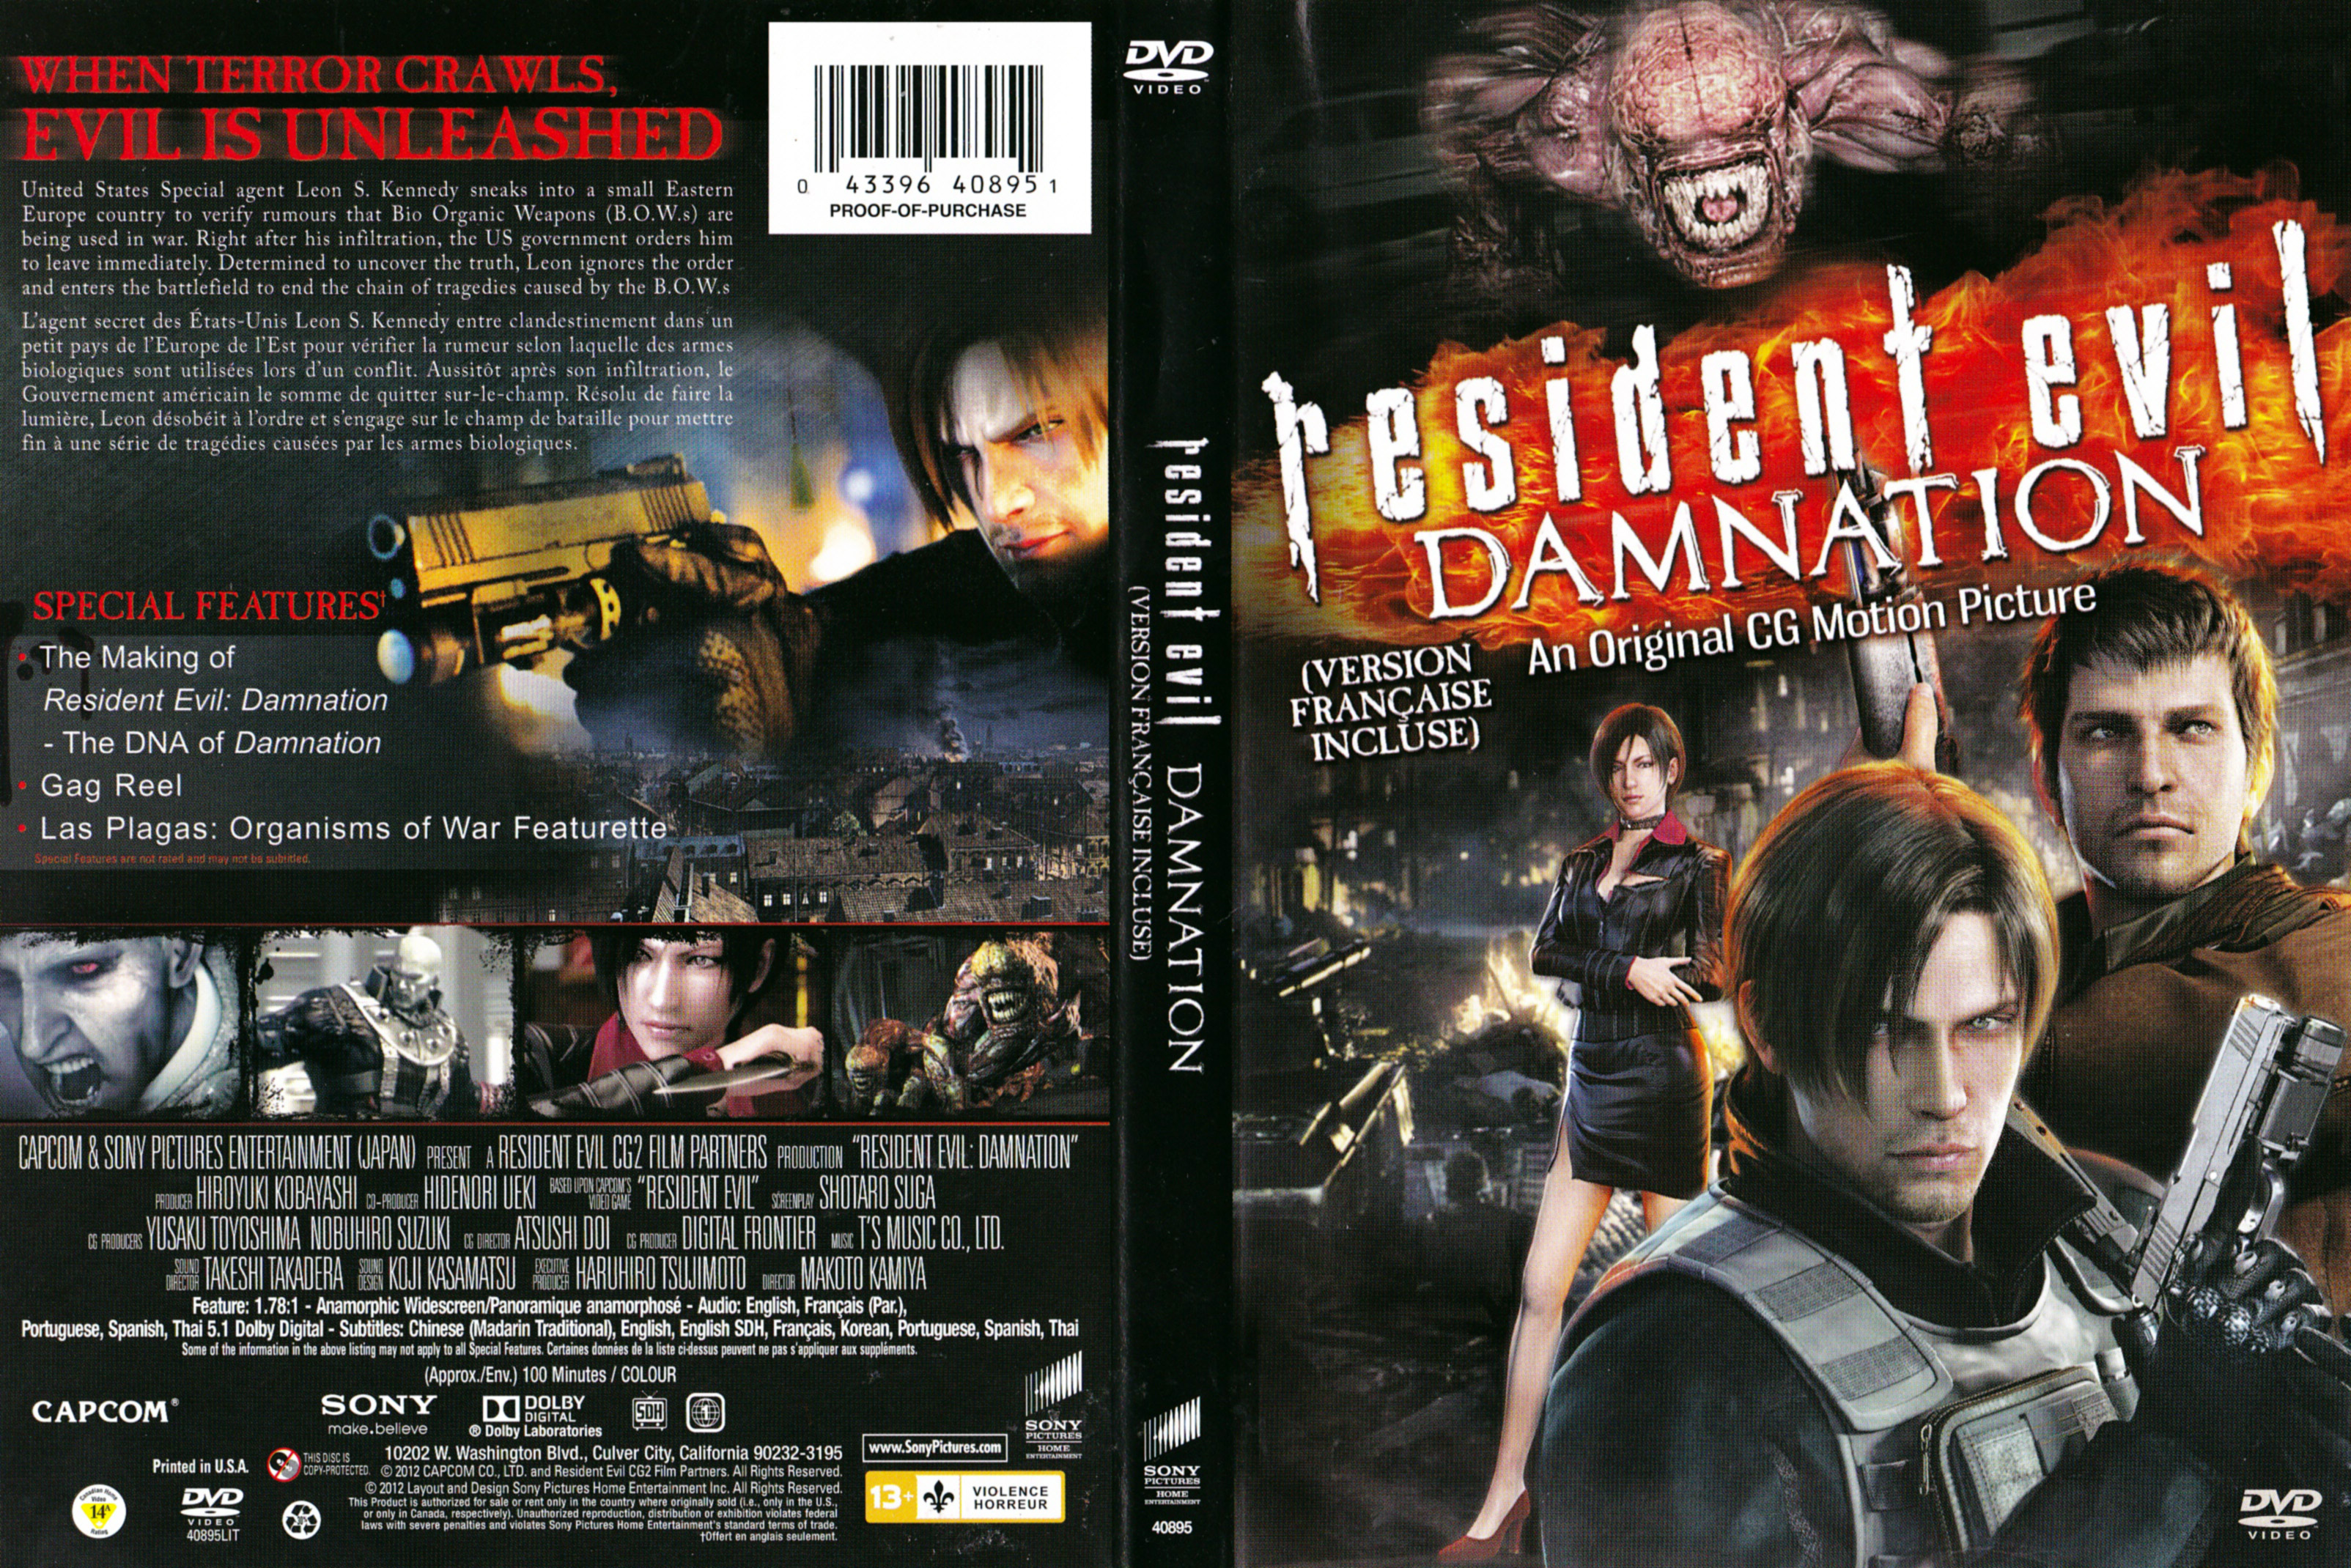 Jaquette DVD Resident Evil Damnation (Canadienne)